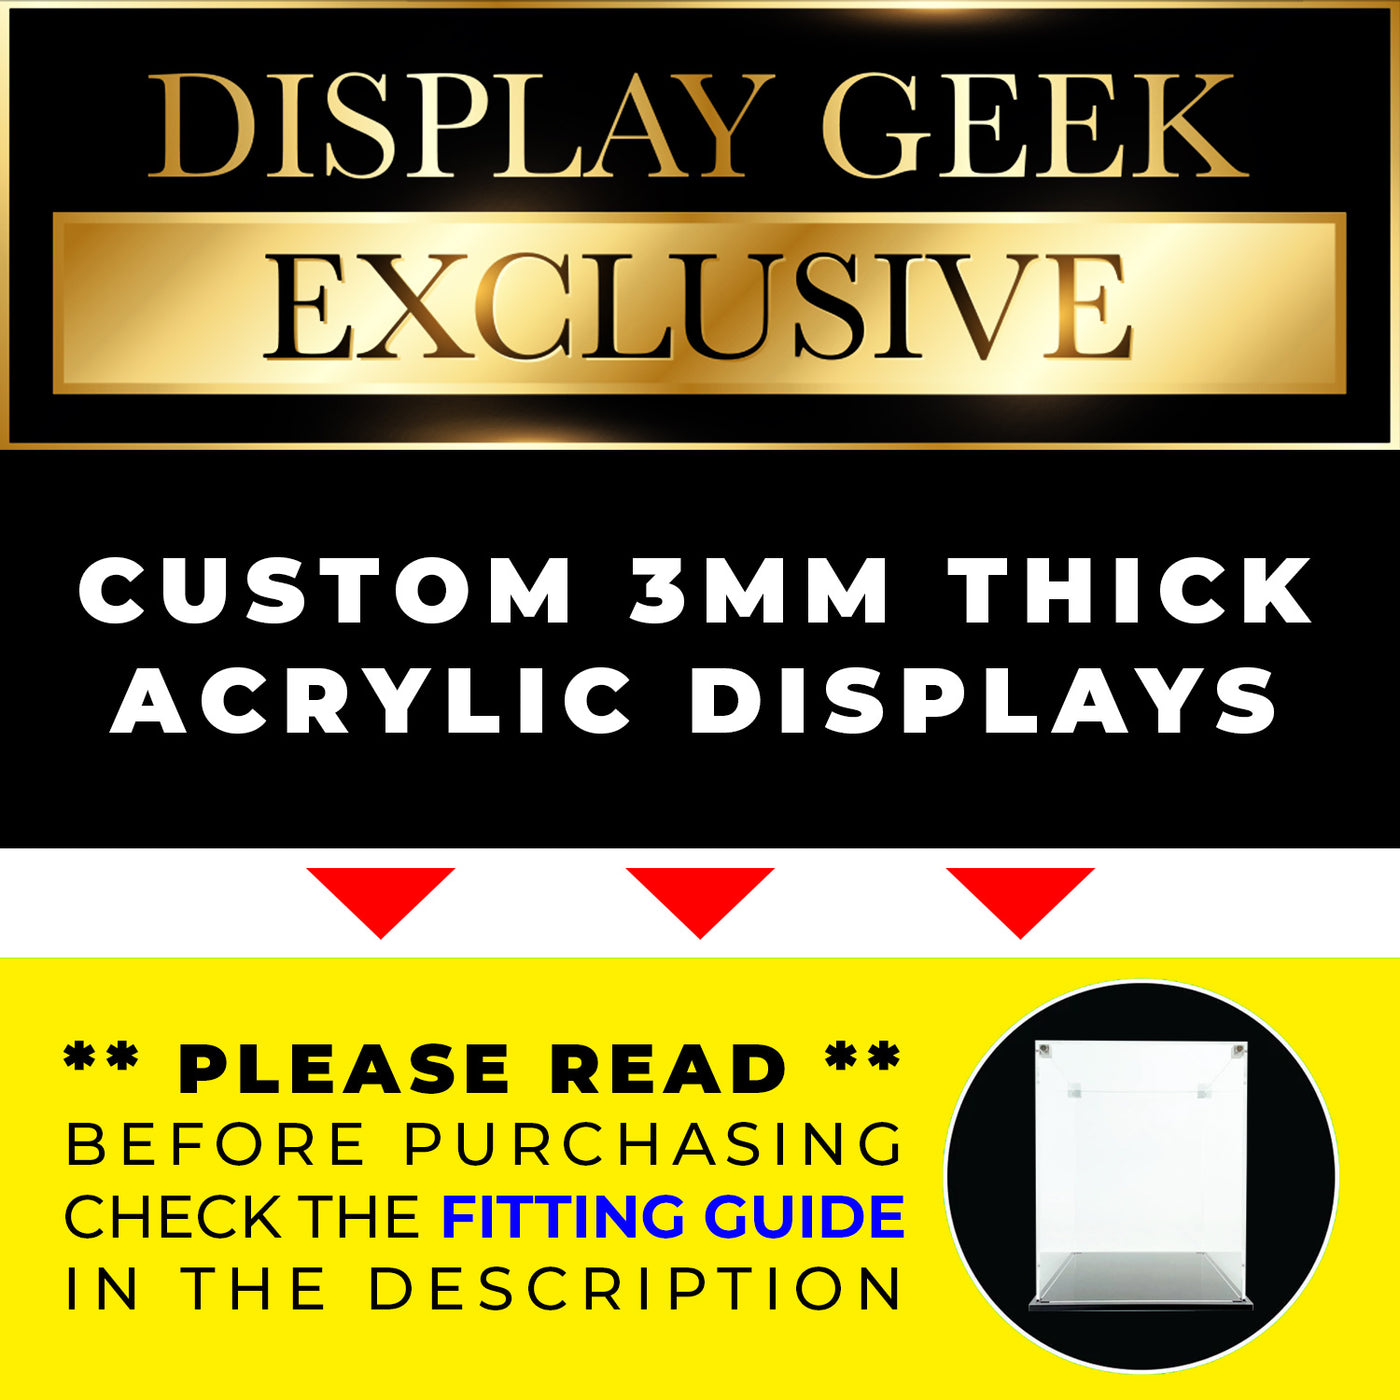 6.25h x 8w x 3.5d Funko 2 Pack Custom Acrylic Display Case for Funko Pop Grails on The Protector Guide App by Display Geek